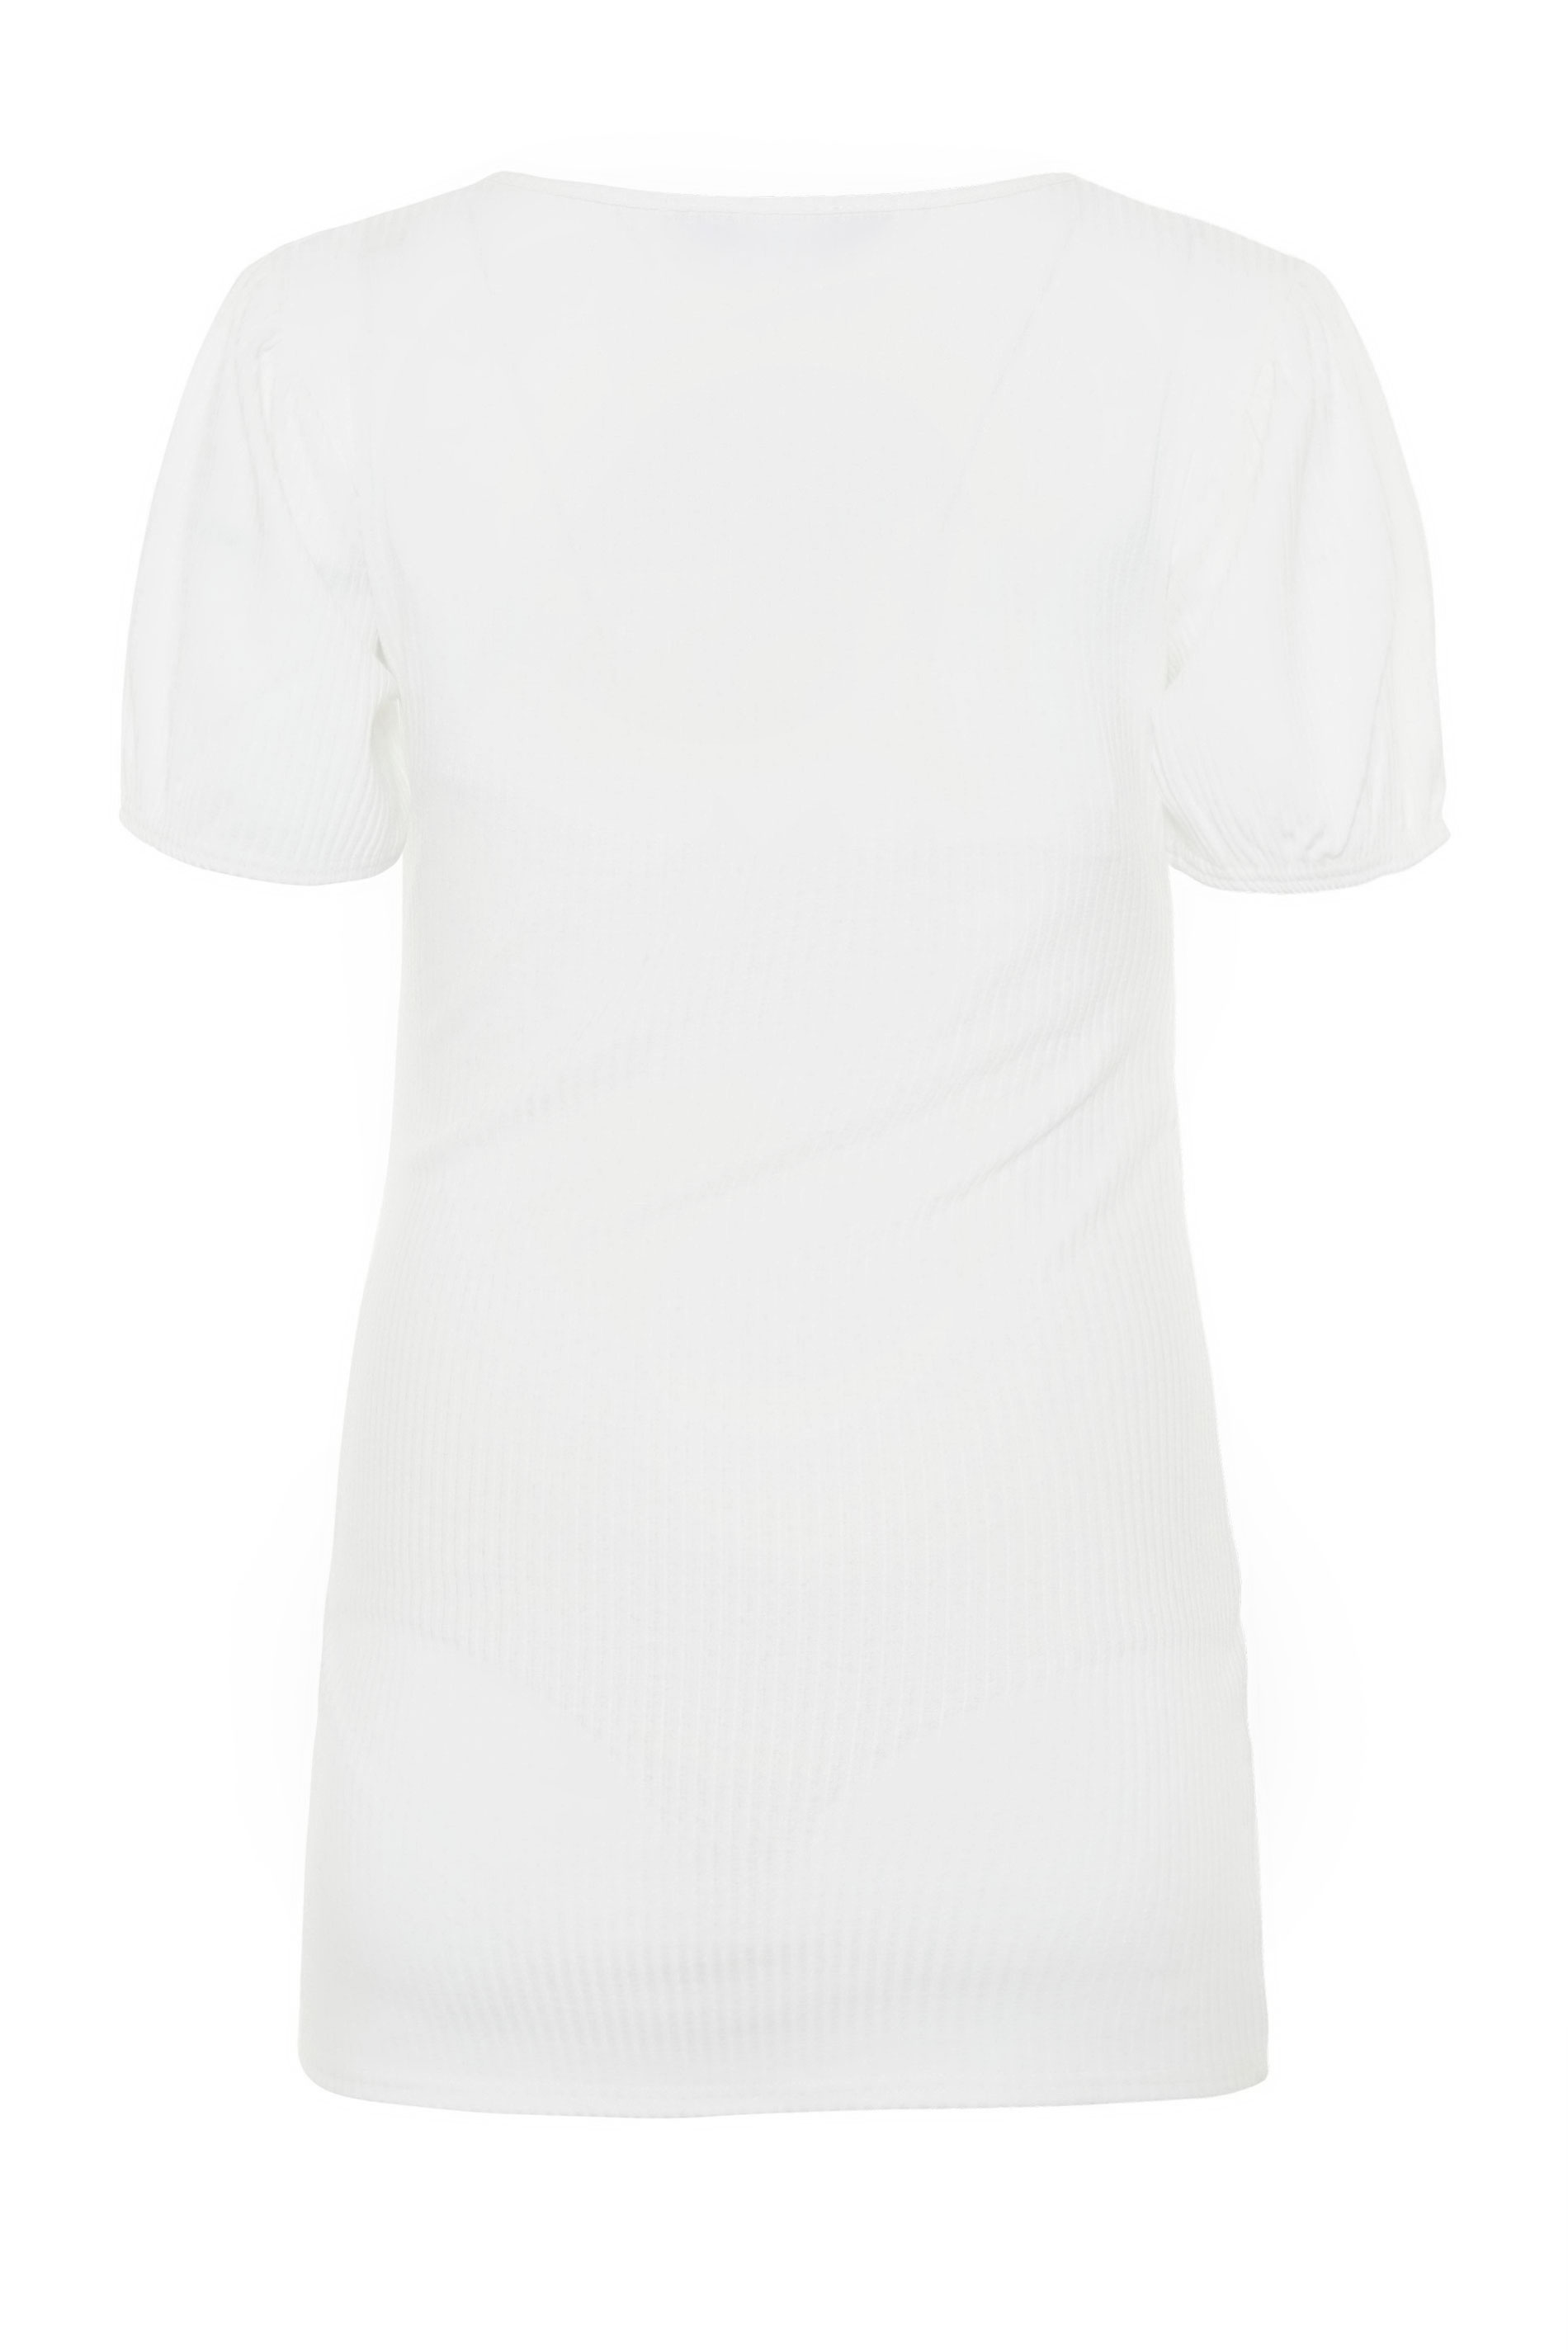 LTS Maternity White Puff Sleeve Top | Long Tall Sally 2